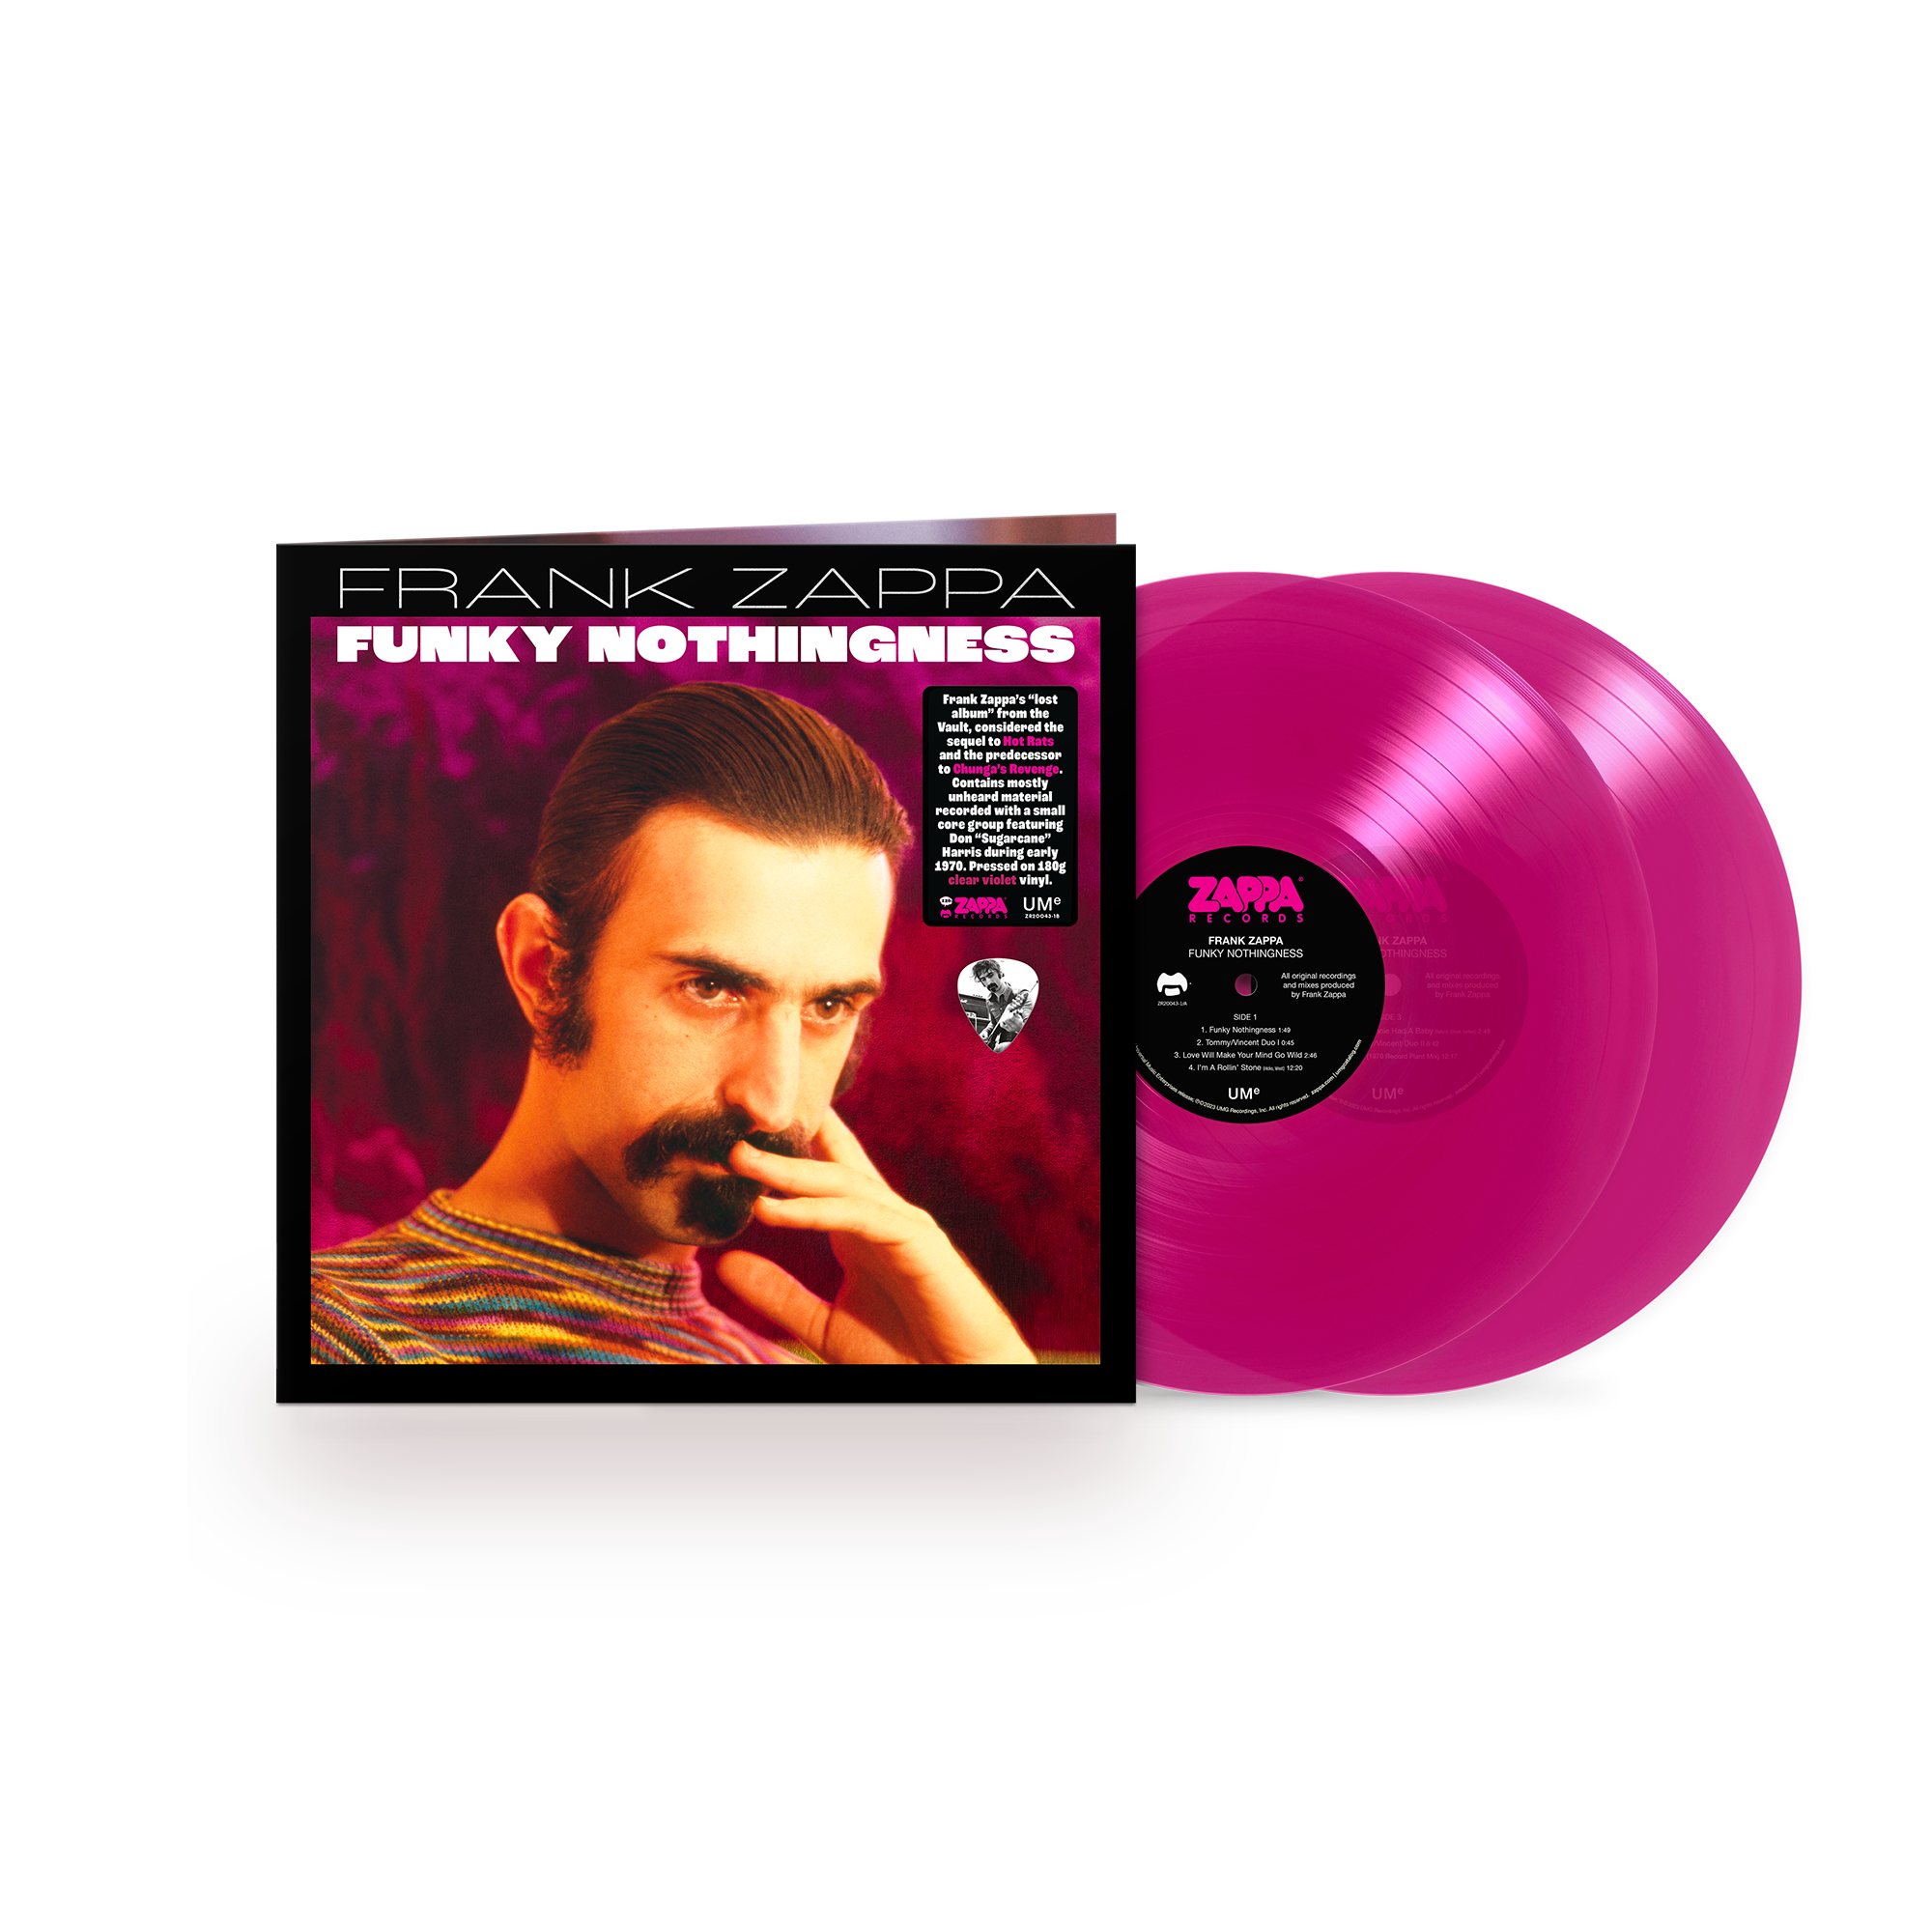 Frank Zappa - Funky Nothingness: Limited Edition Exclusive Violet Vinyl 2LP